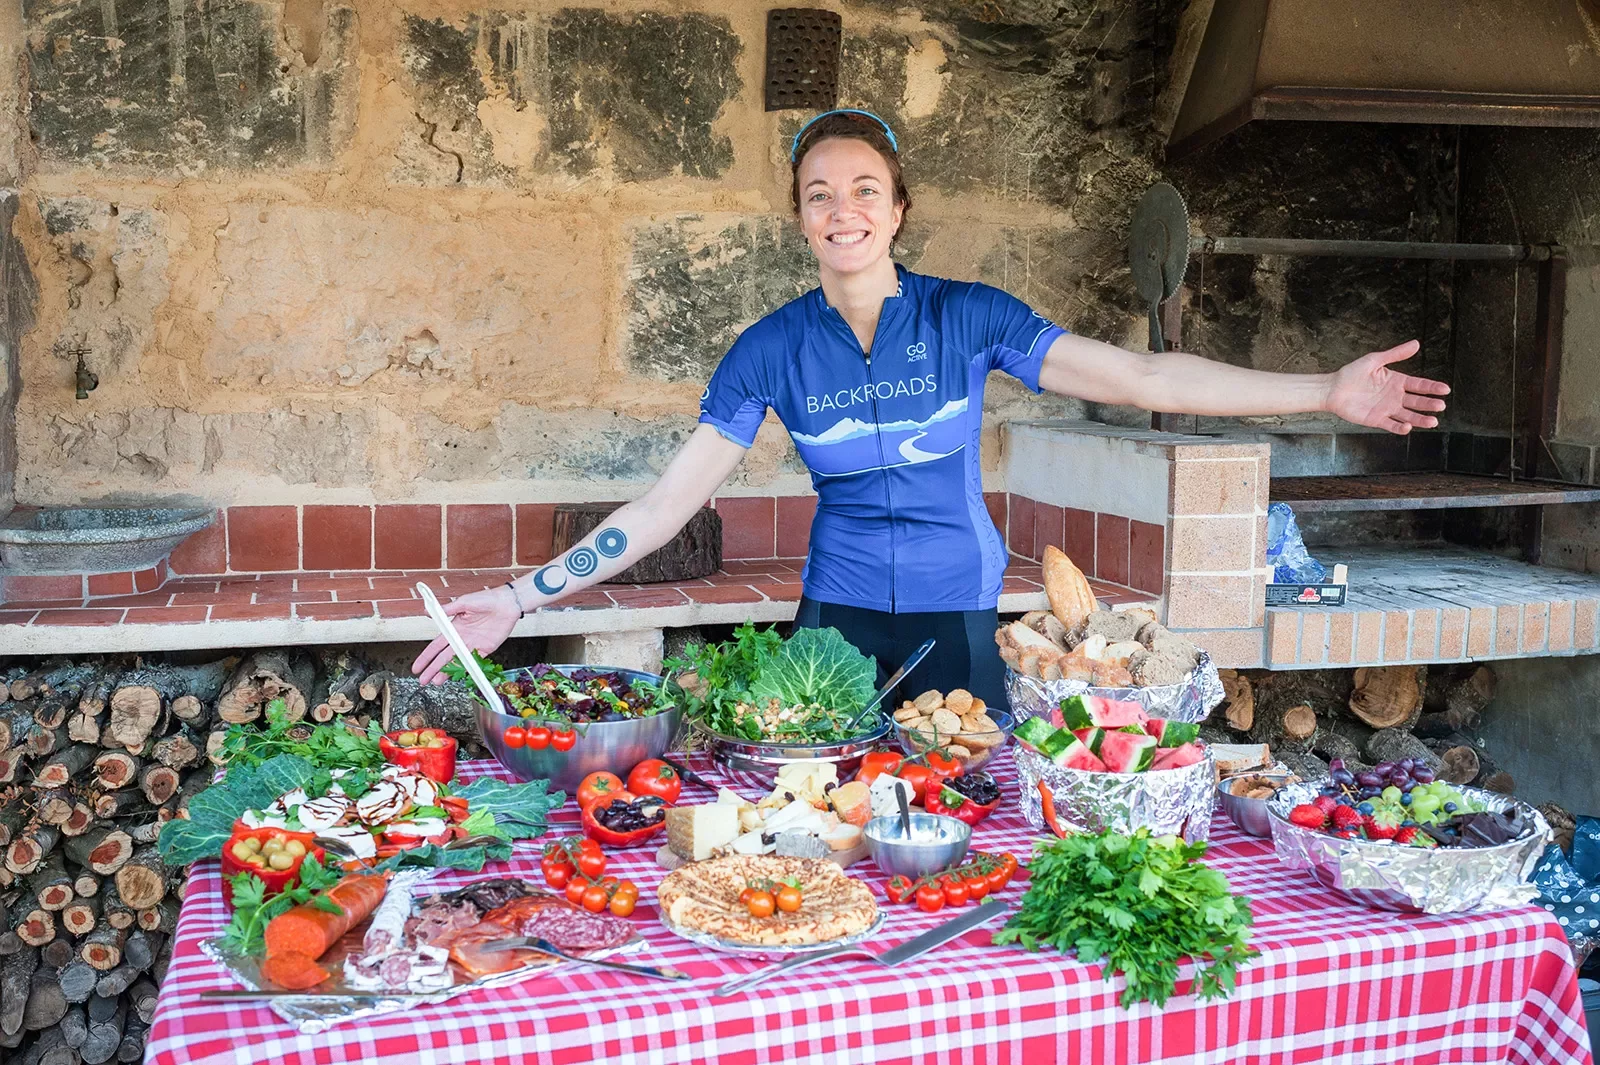 Backroads leader posing with table of Spanish food and snacks.